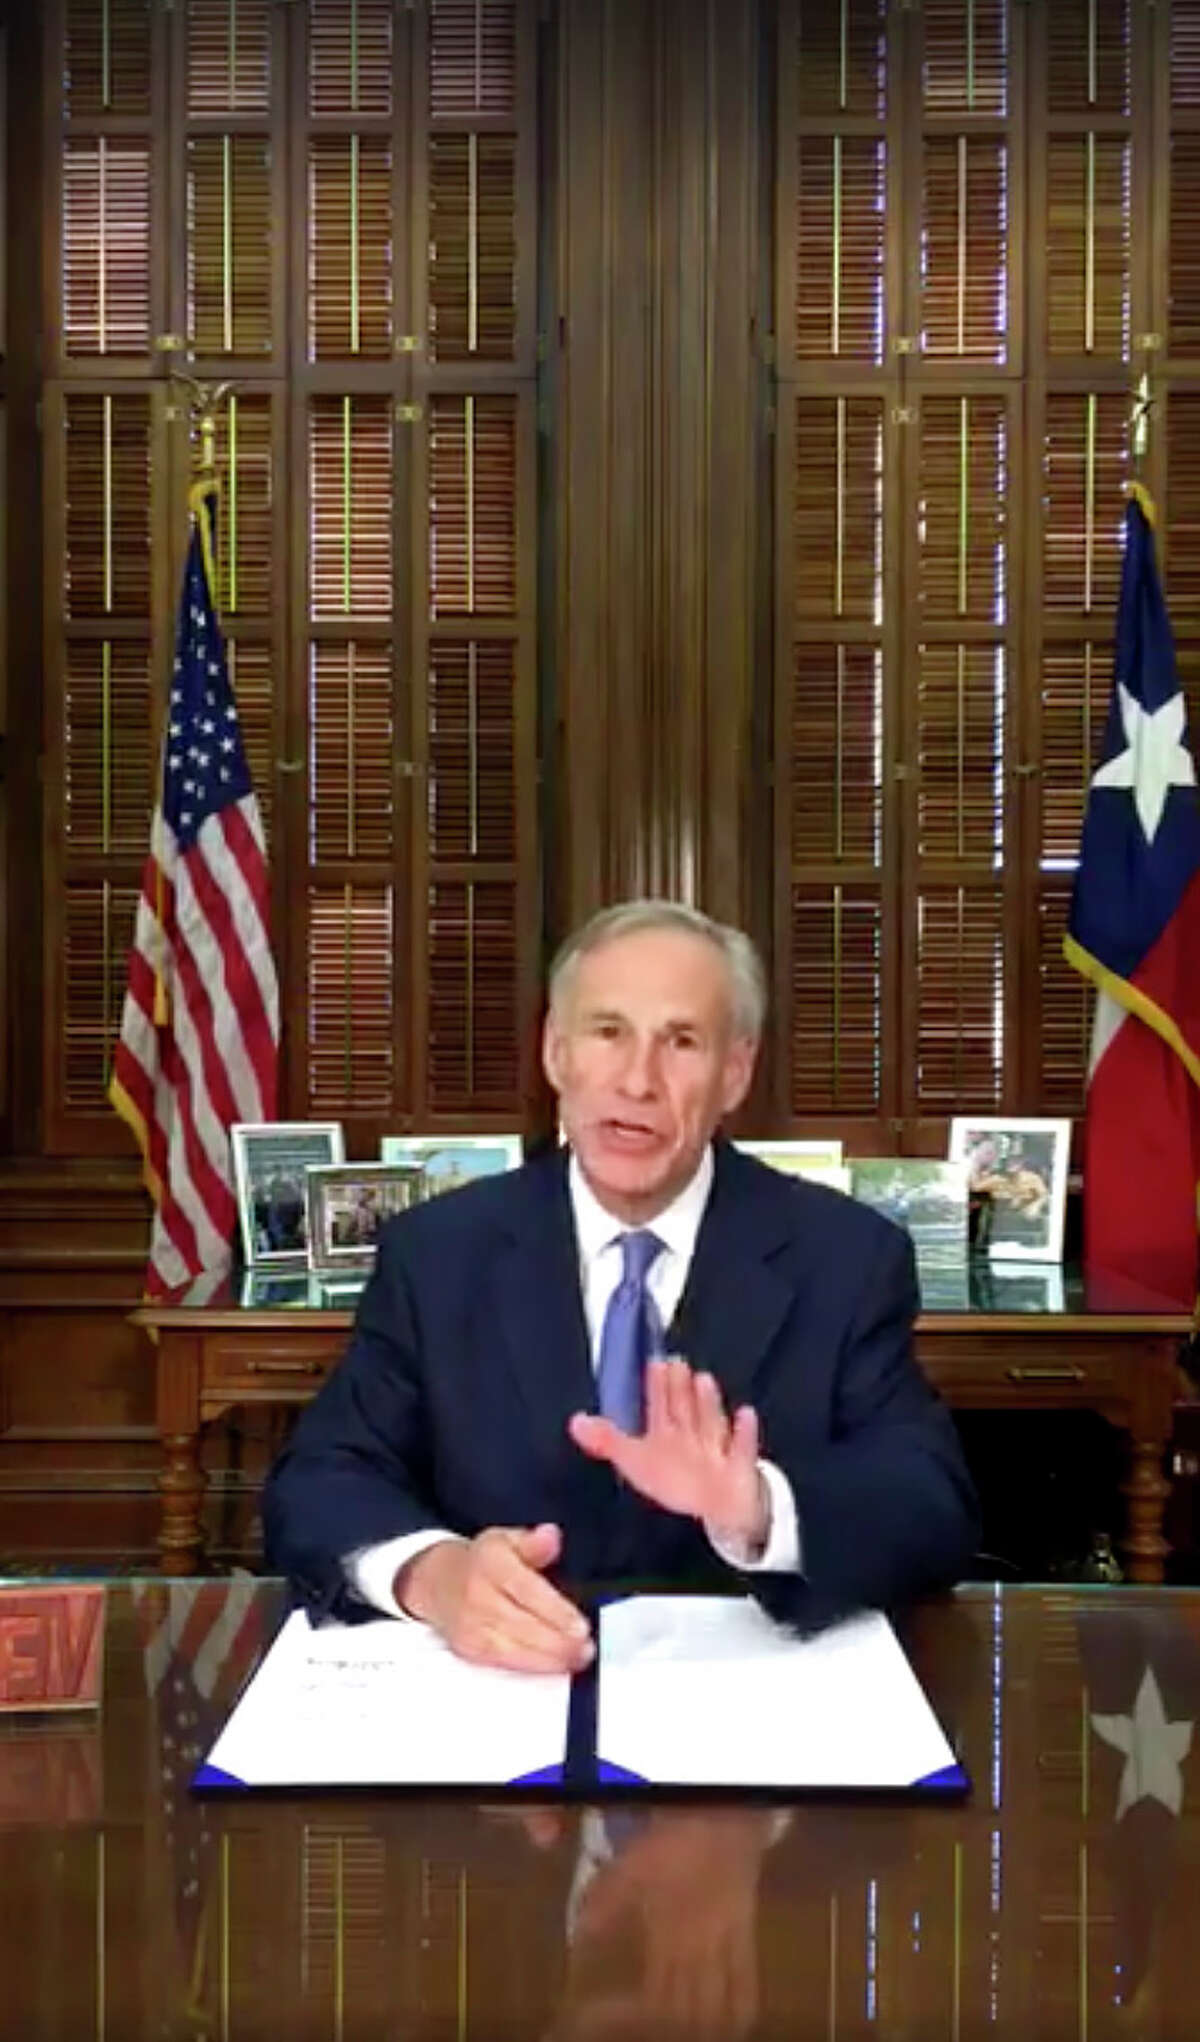 Via Facebook Live, Texas Governor Greg Abbott signs Senate Bill 4, known as the "sanctuary cities" bill, Sunday, May 7, 2017. (Photo screen grab from Facebook)